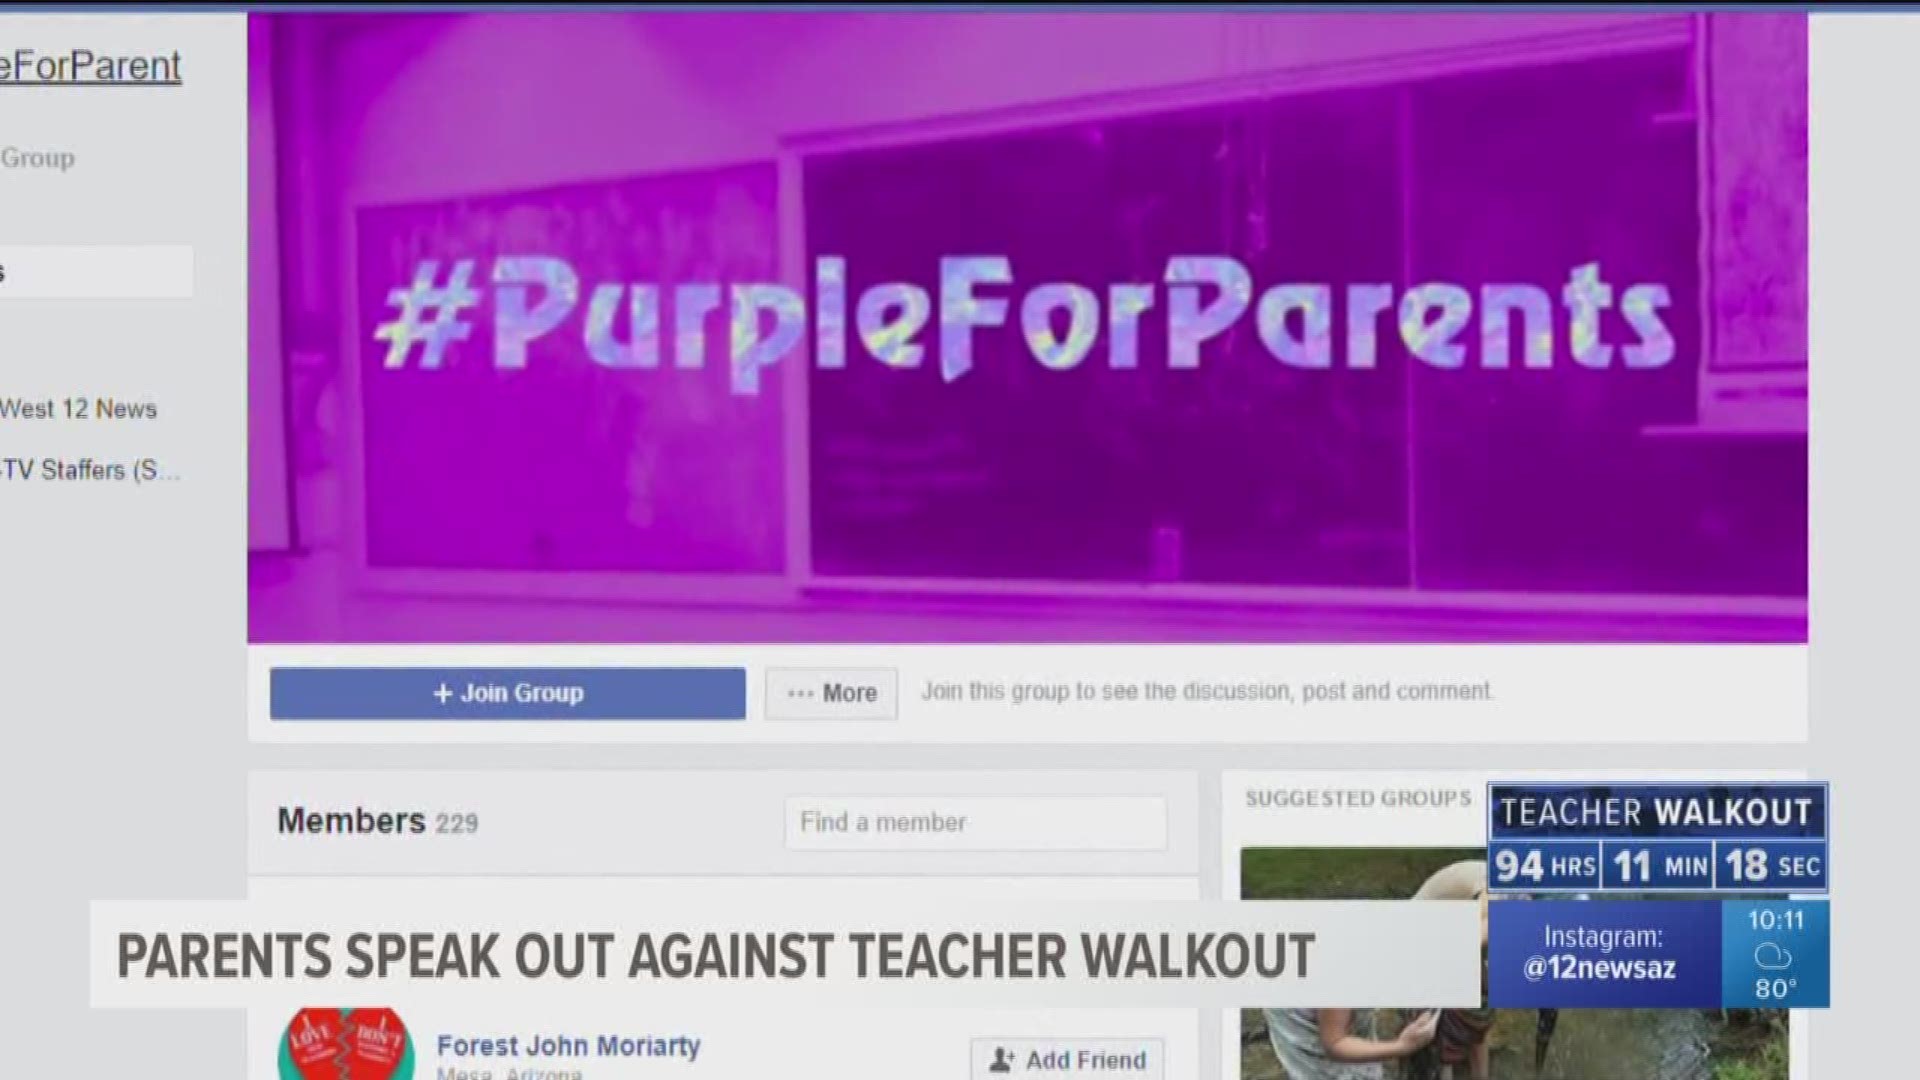 #PurpleforParents is speaking out against the walkout and the #RedForEd movement.